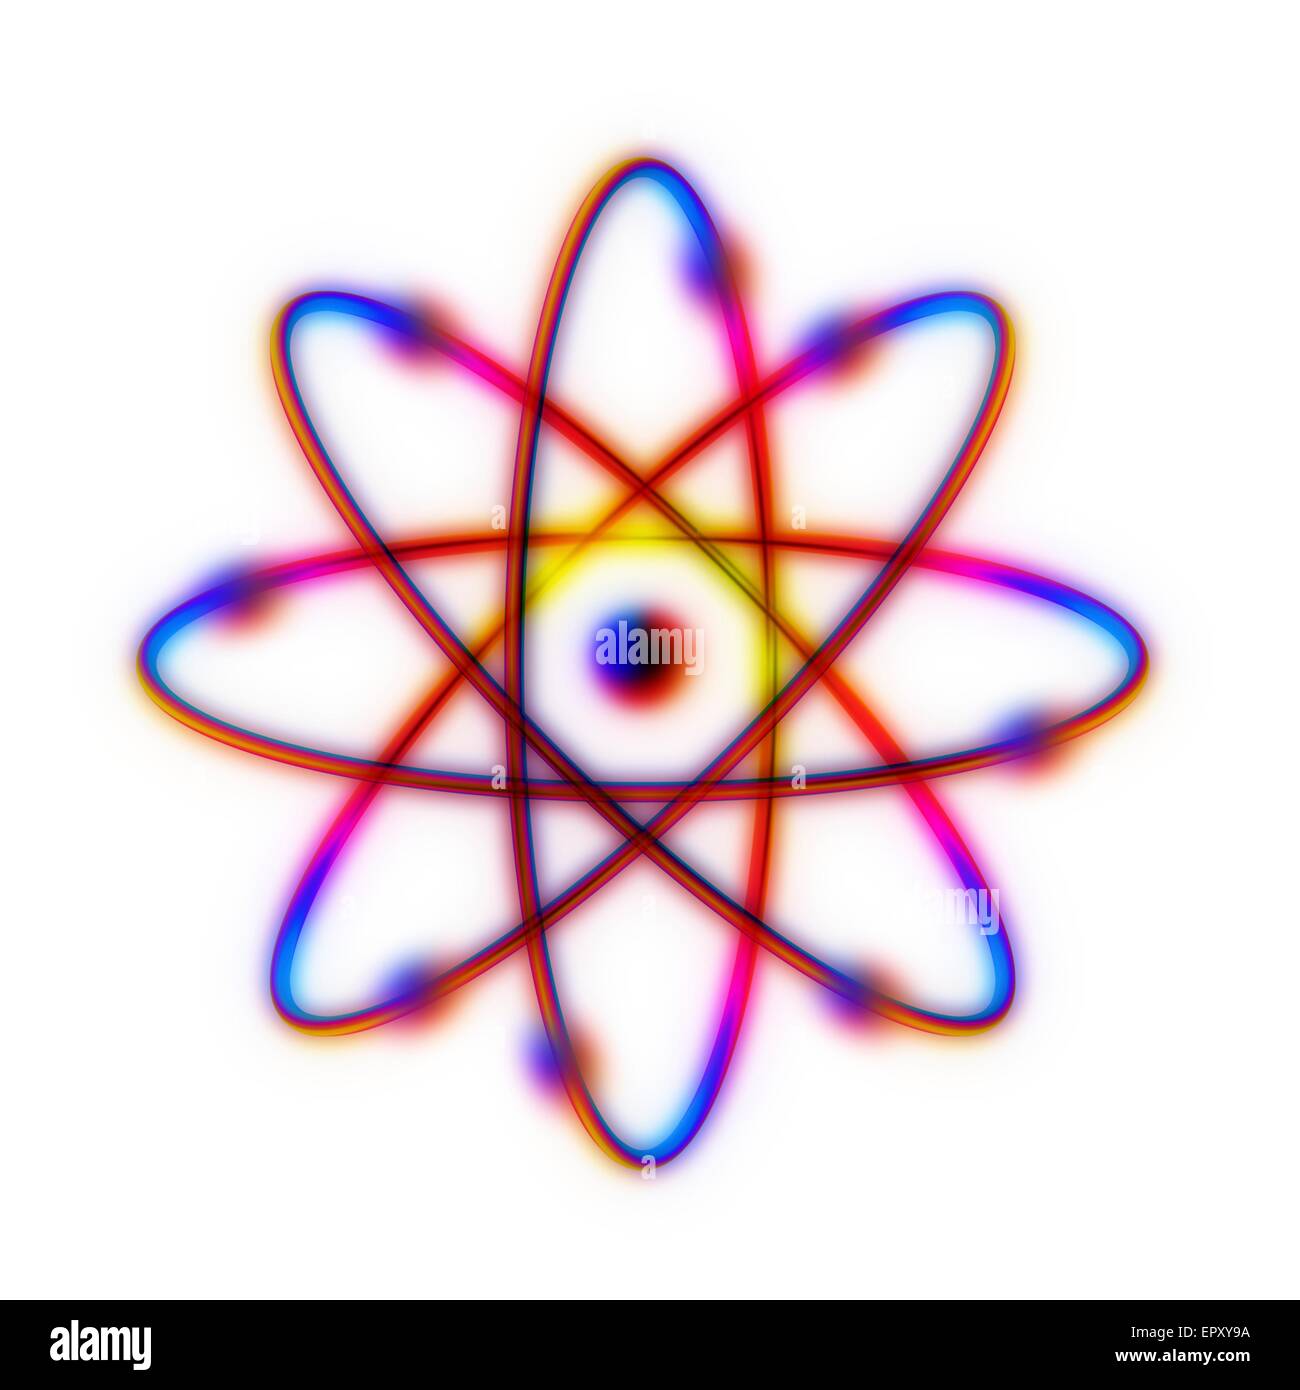 Atomic structure. Conceptual computer artwork representing the structure of an atom. Eight electrons are seen orbiting the central nucleus along definite paths. This is a schematic 'Bohr model' of an atom; electrons are thought to inhabit areas of probabi Stock Photo